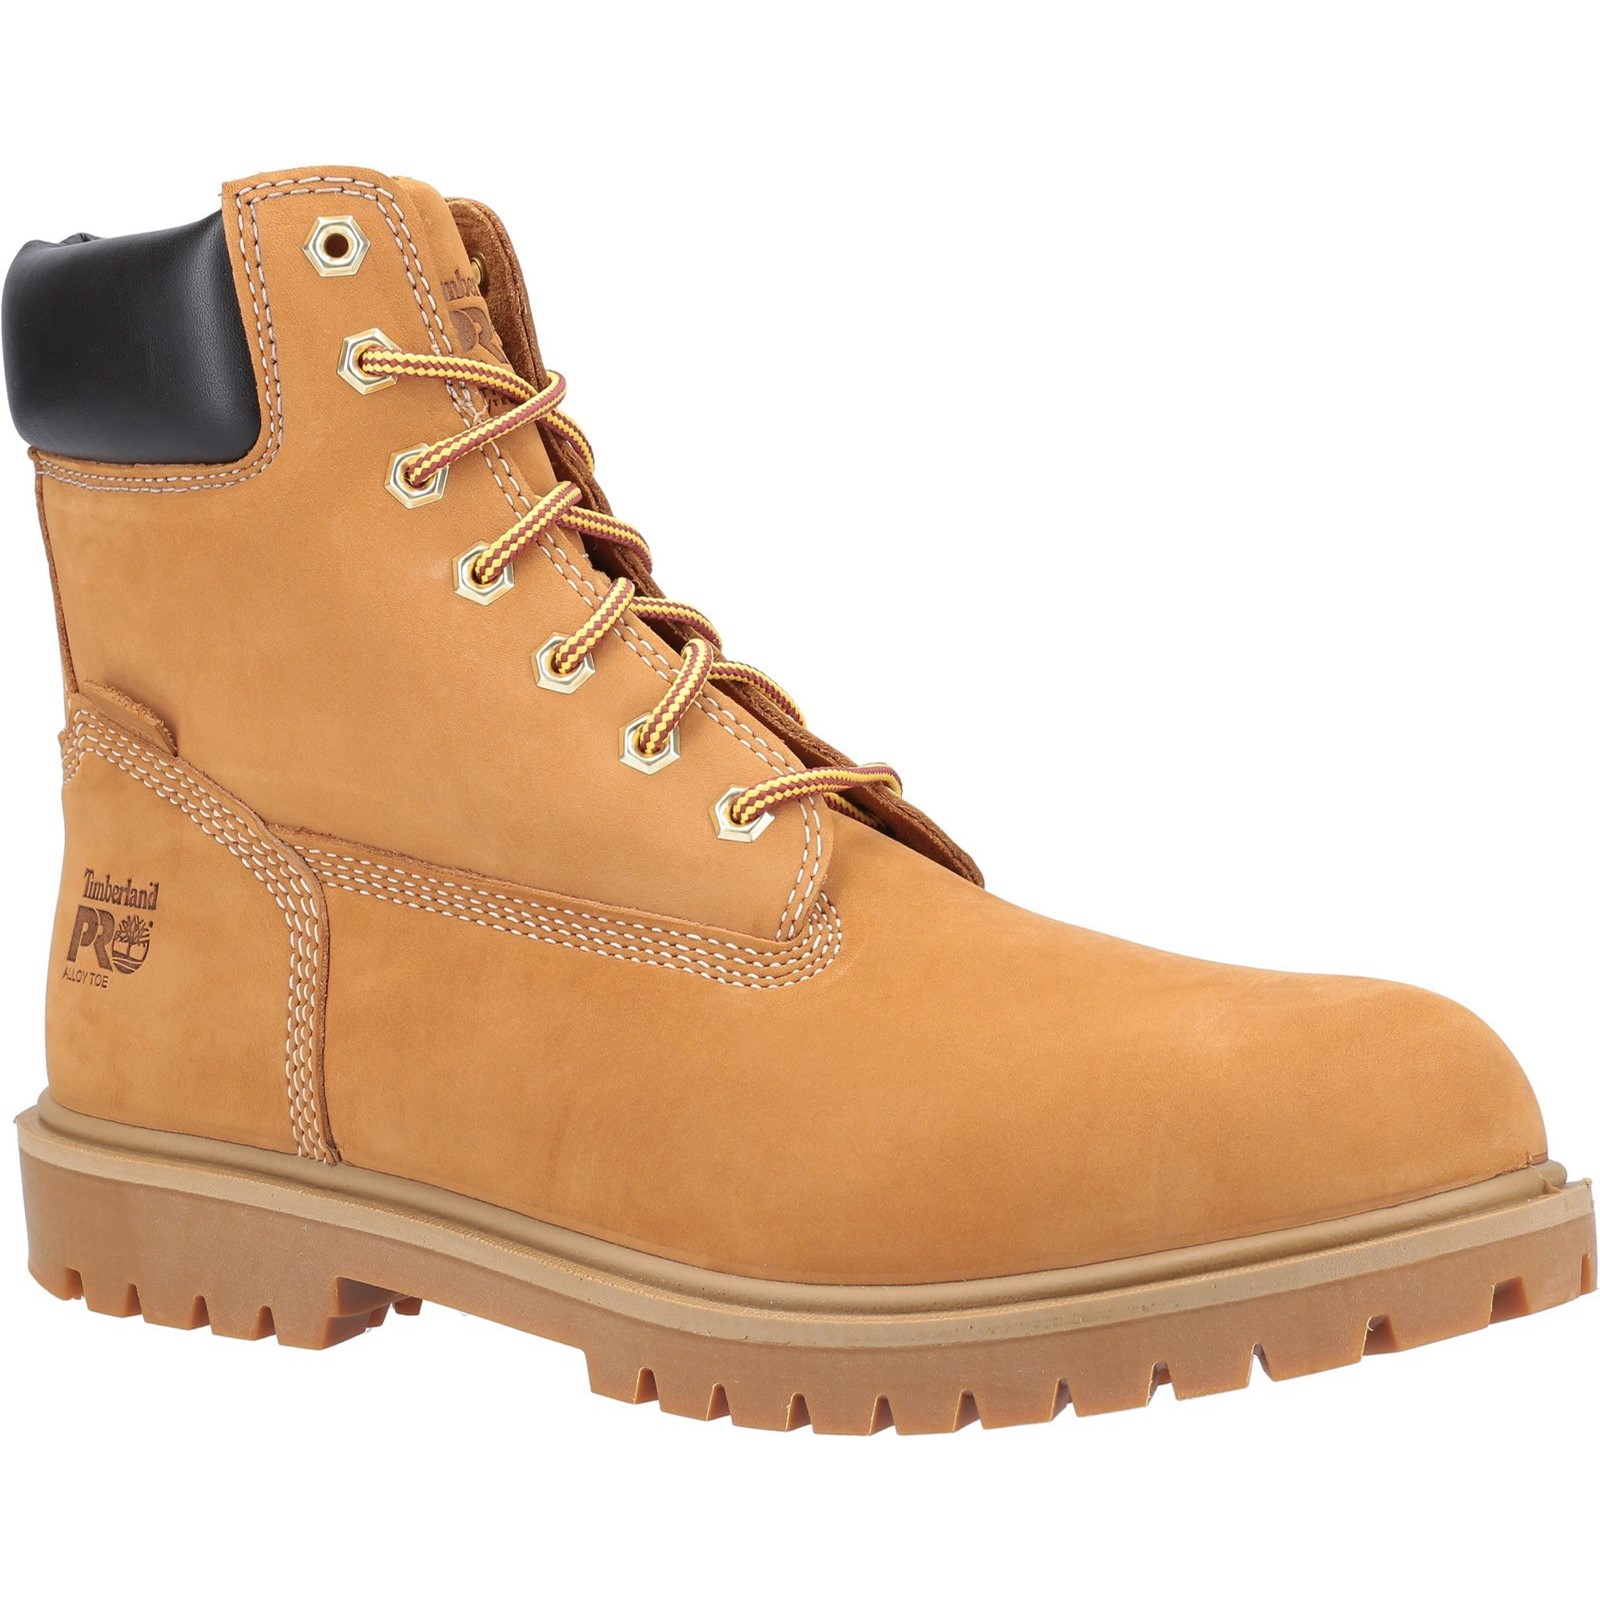 Iconic Safety Toe Work Boot